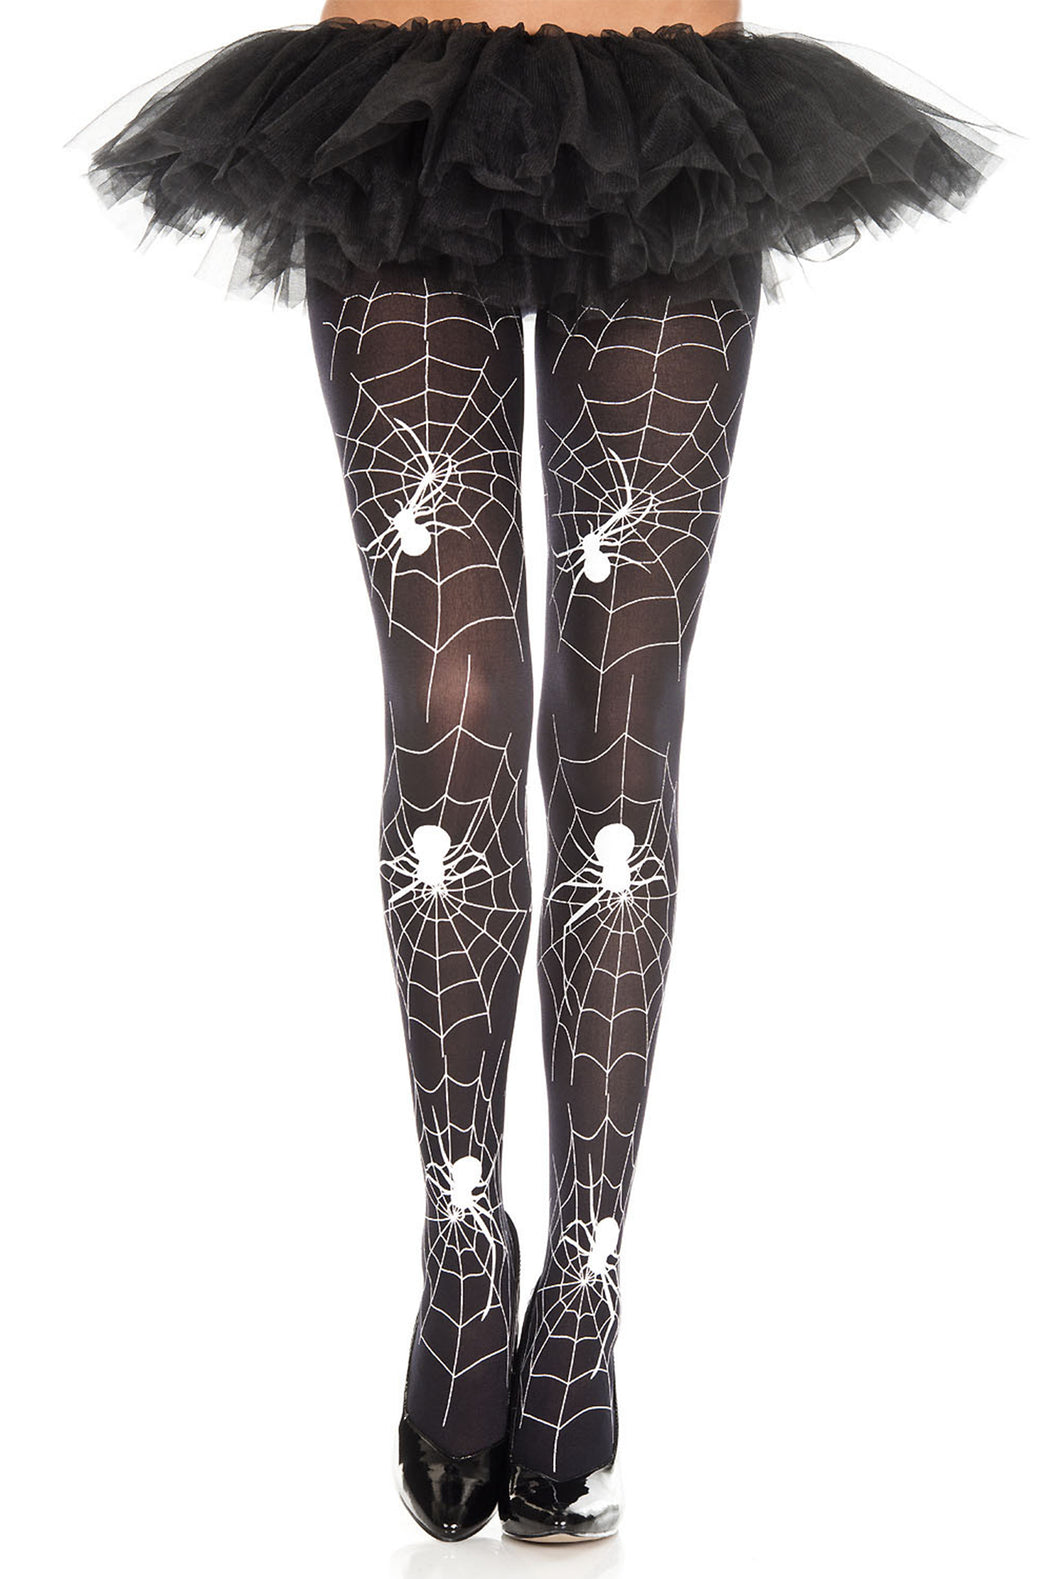 Spider and web print pantyhose